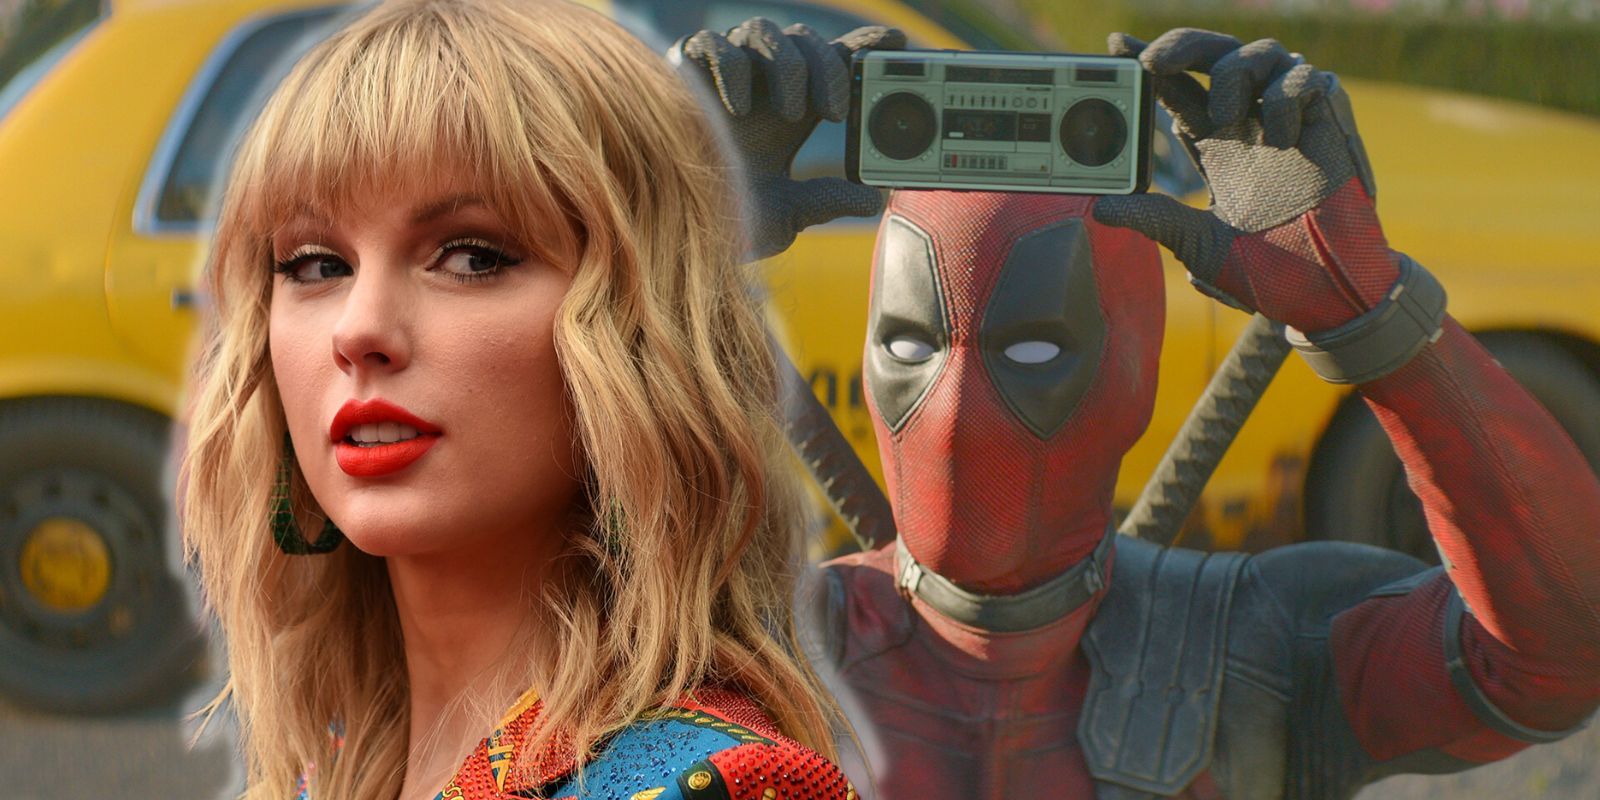 Taylor Swift photo with Deadpool in the background in front of a taxi